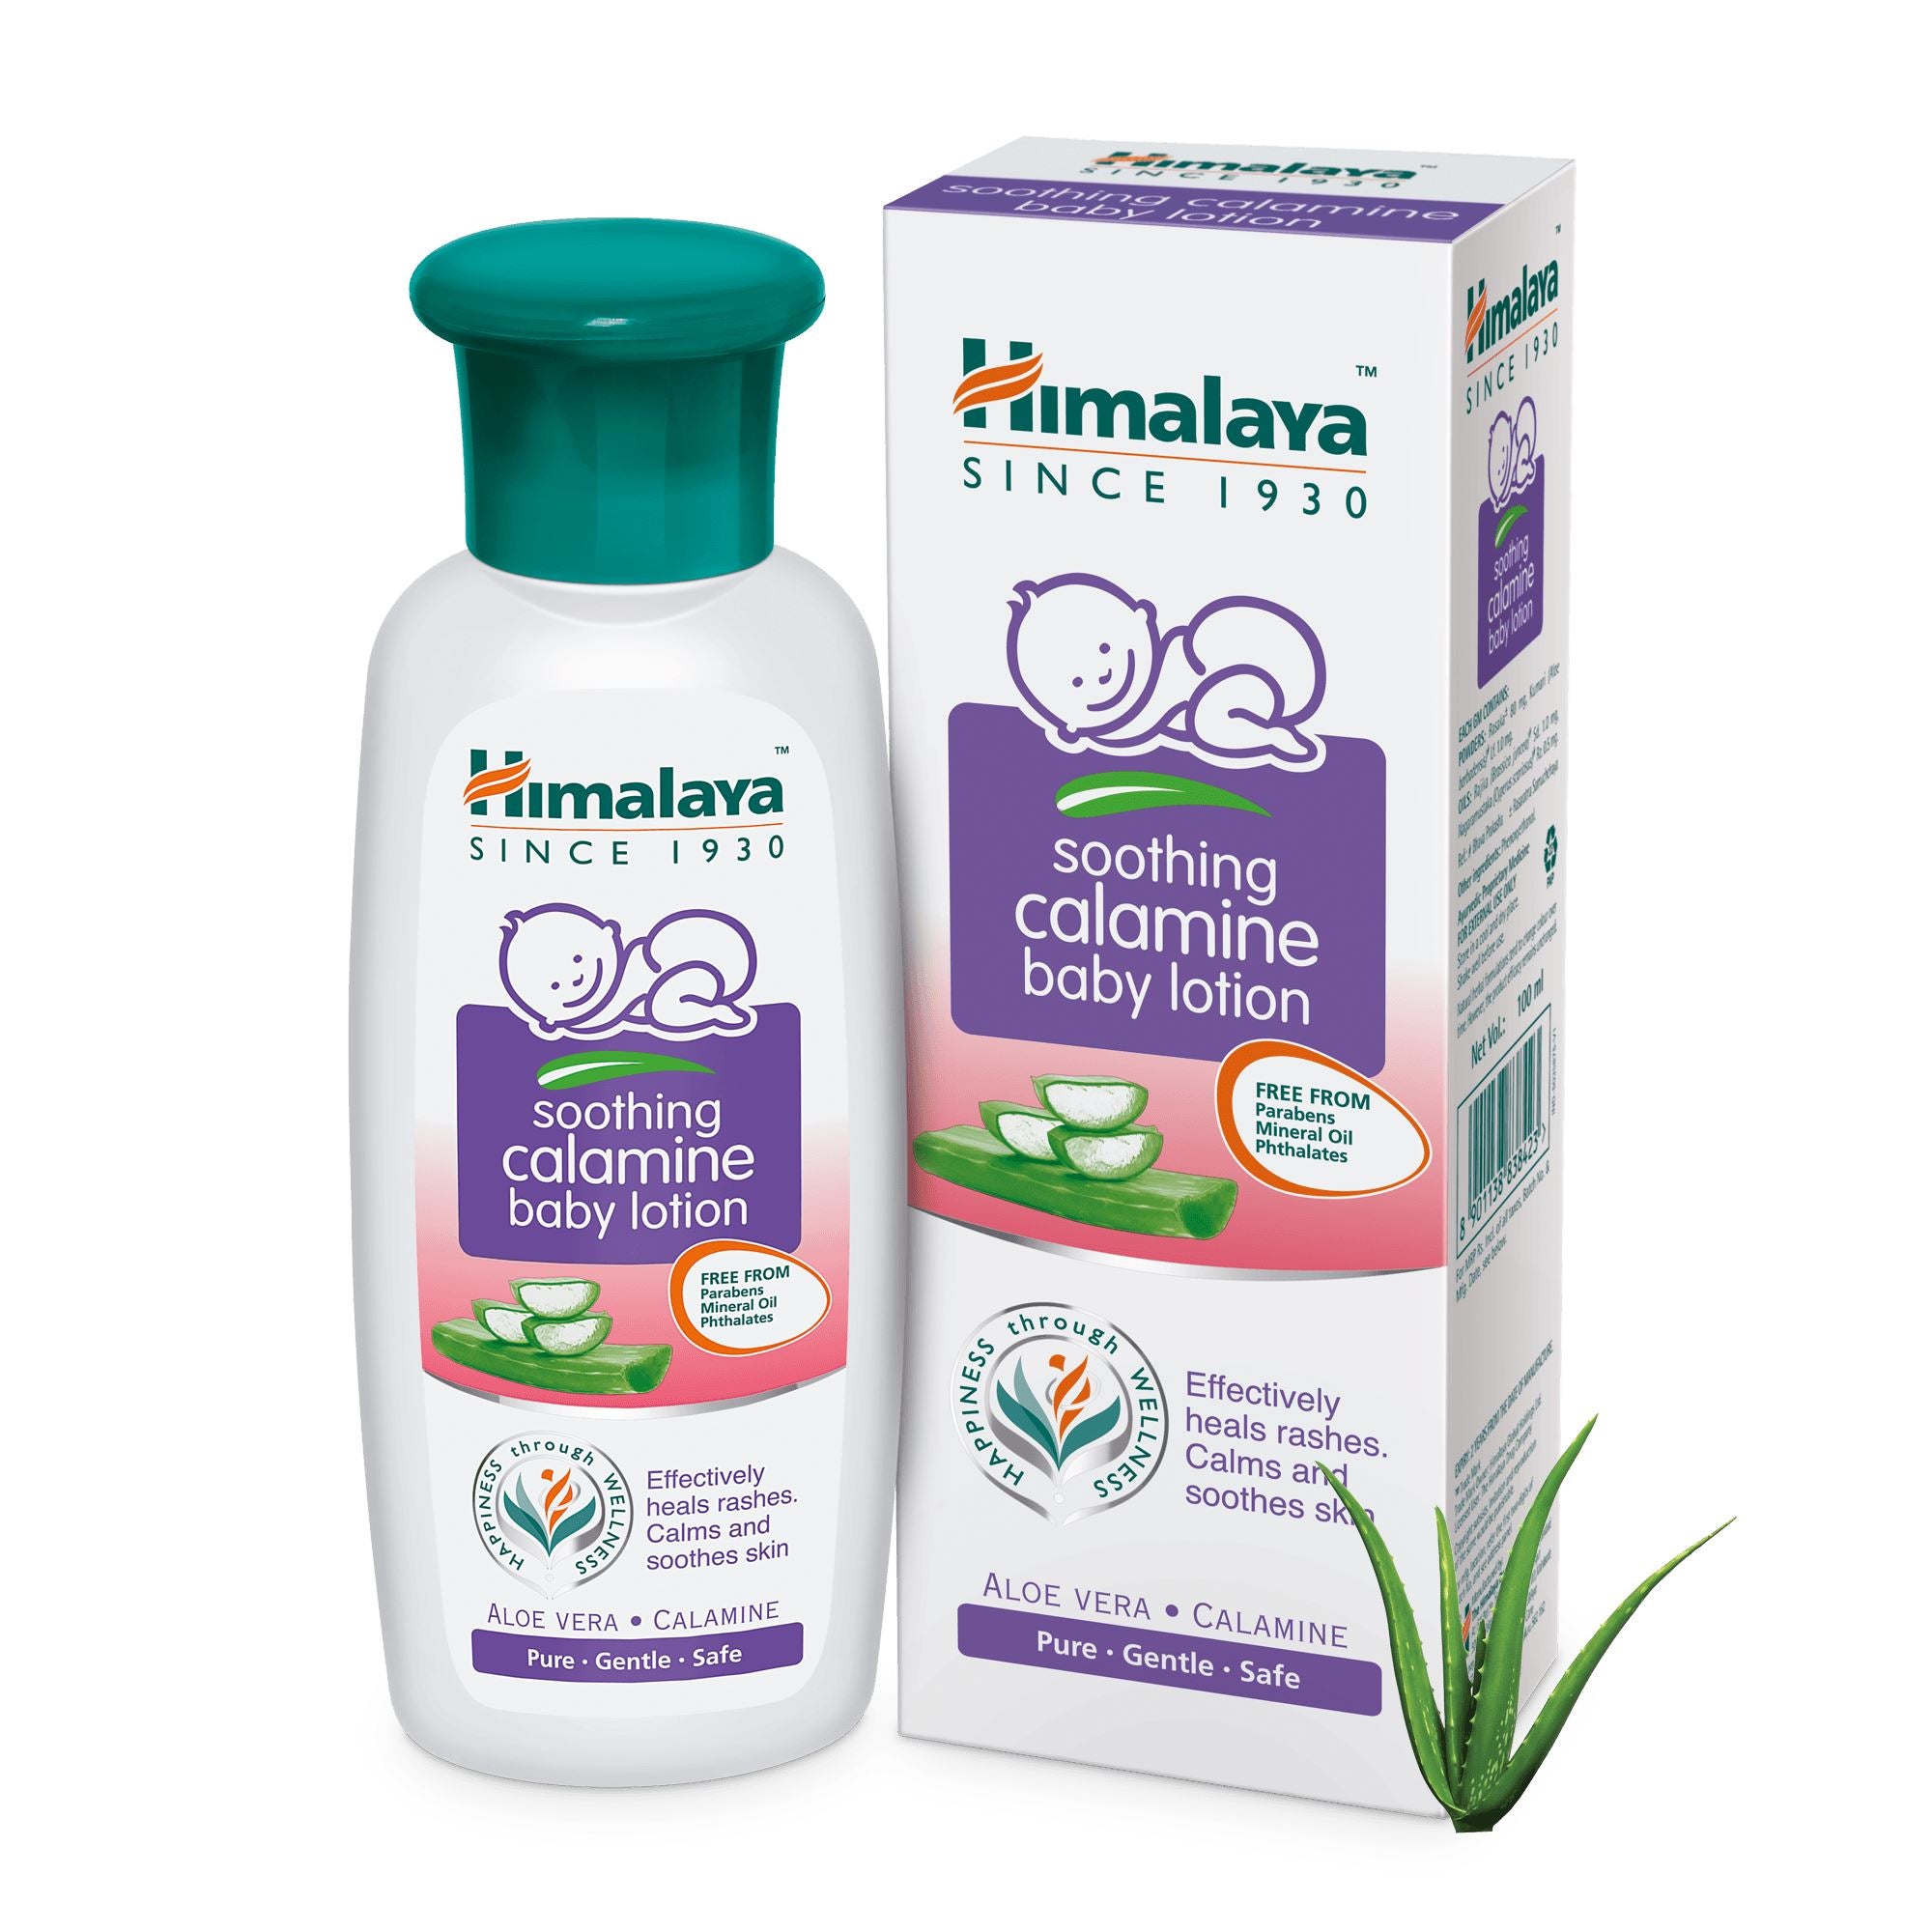 Himalaya soothing calamine baby lotion - Effective relief from skin rashes